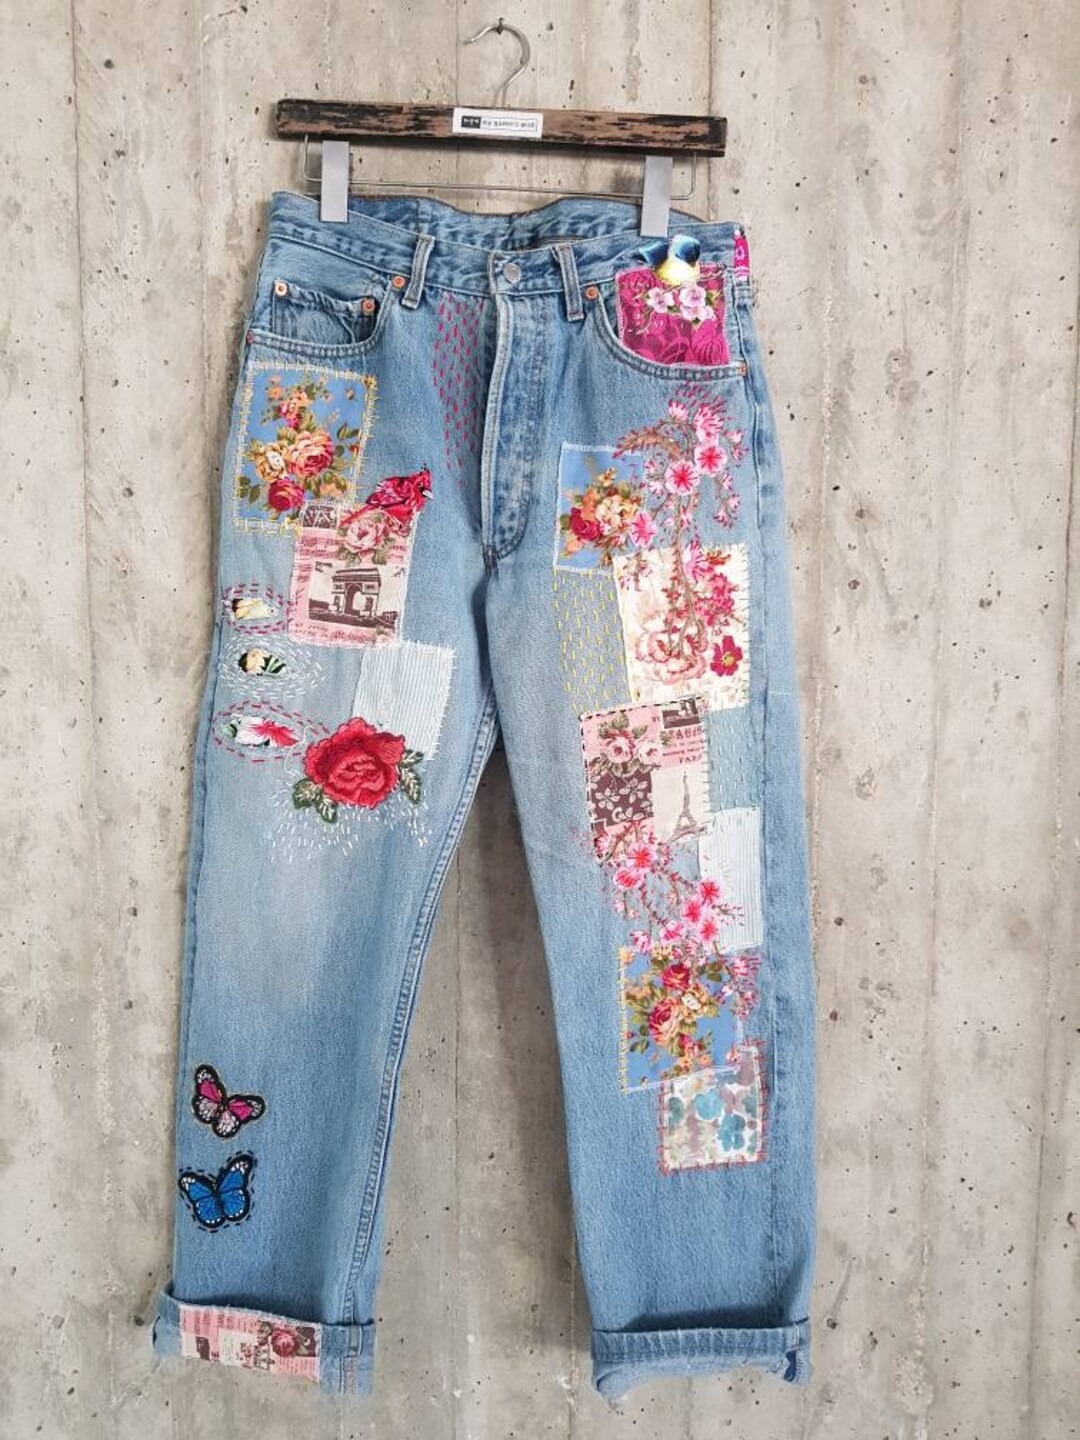 Patched Denim / Patched Jeans / Reworked Vintage Jeans With - Etsy Israel